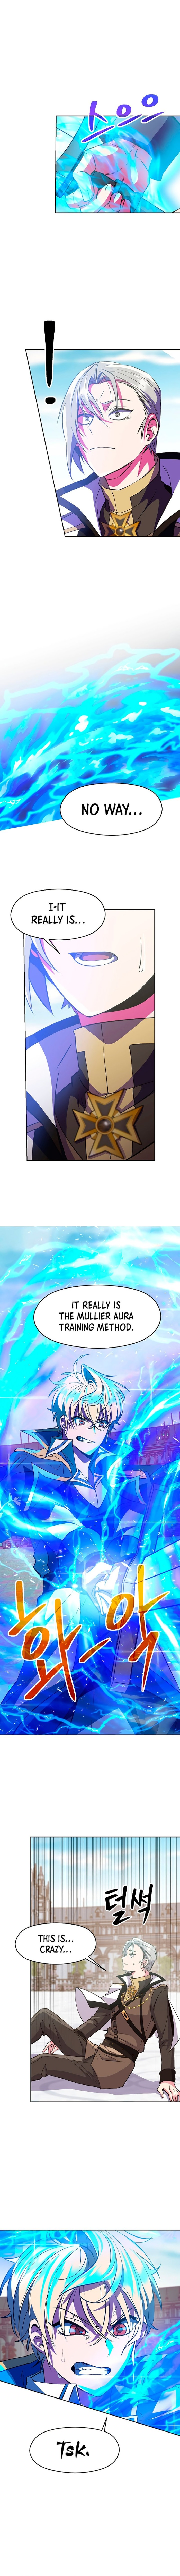 Archmage Transcending Through Regression - Chapter 8 Page 7